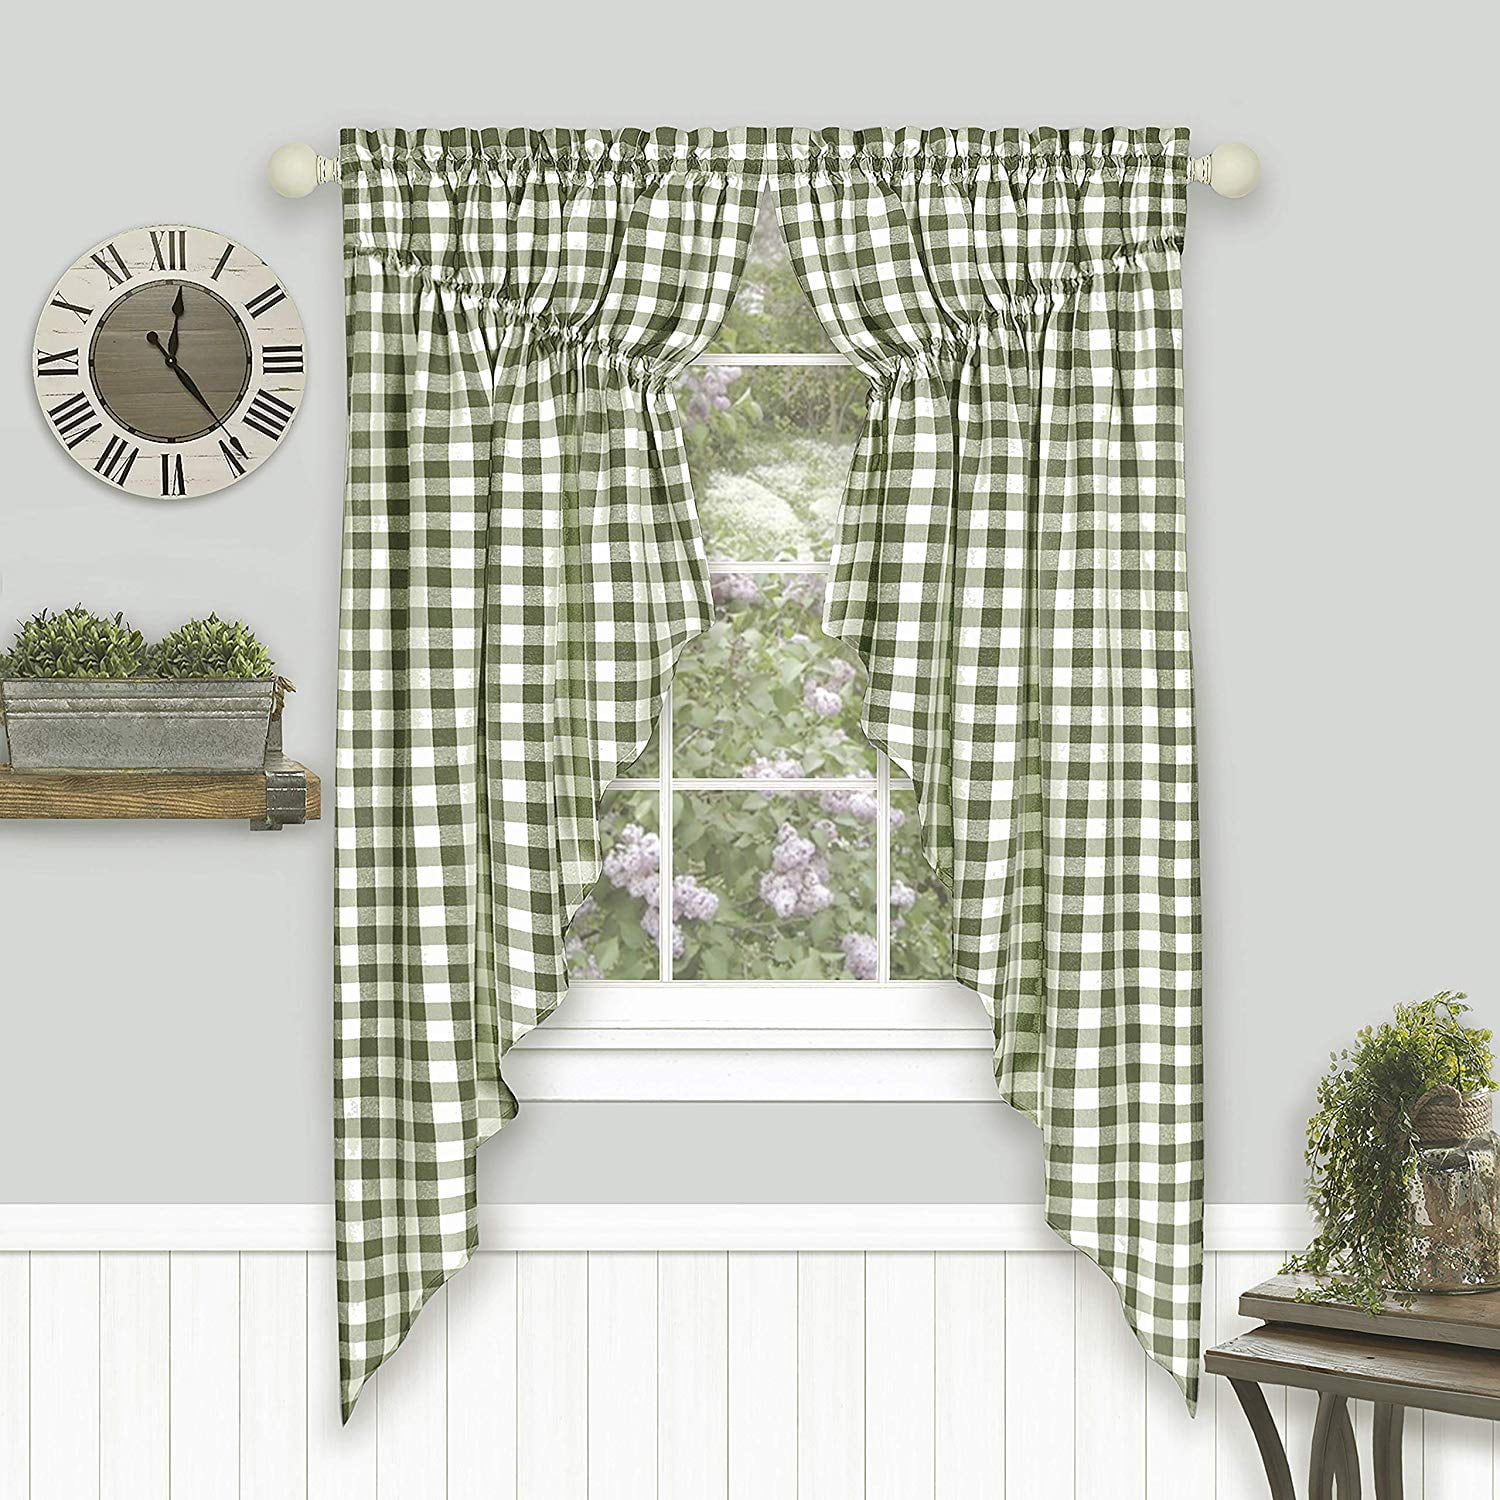 Cotton Valance Window Curtains Embroidered Ceiling Installation Woven Decoration 